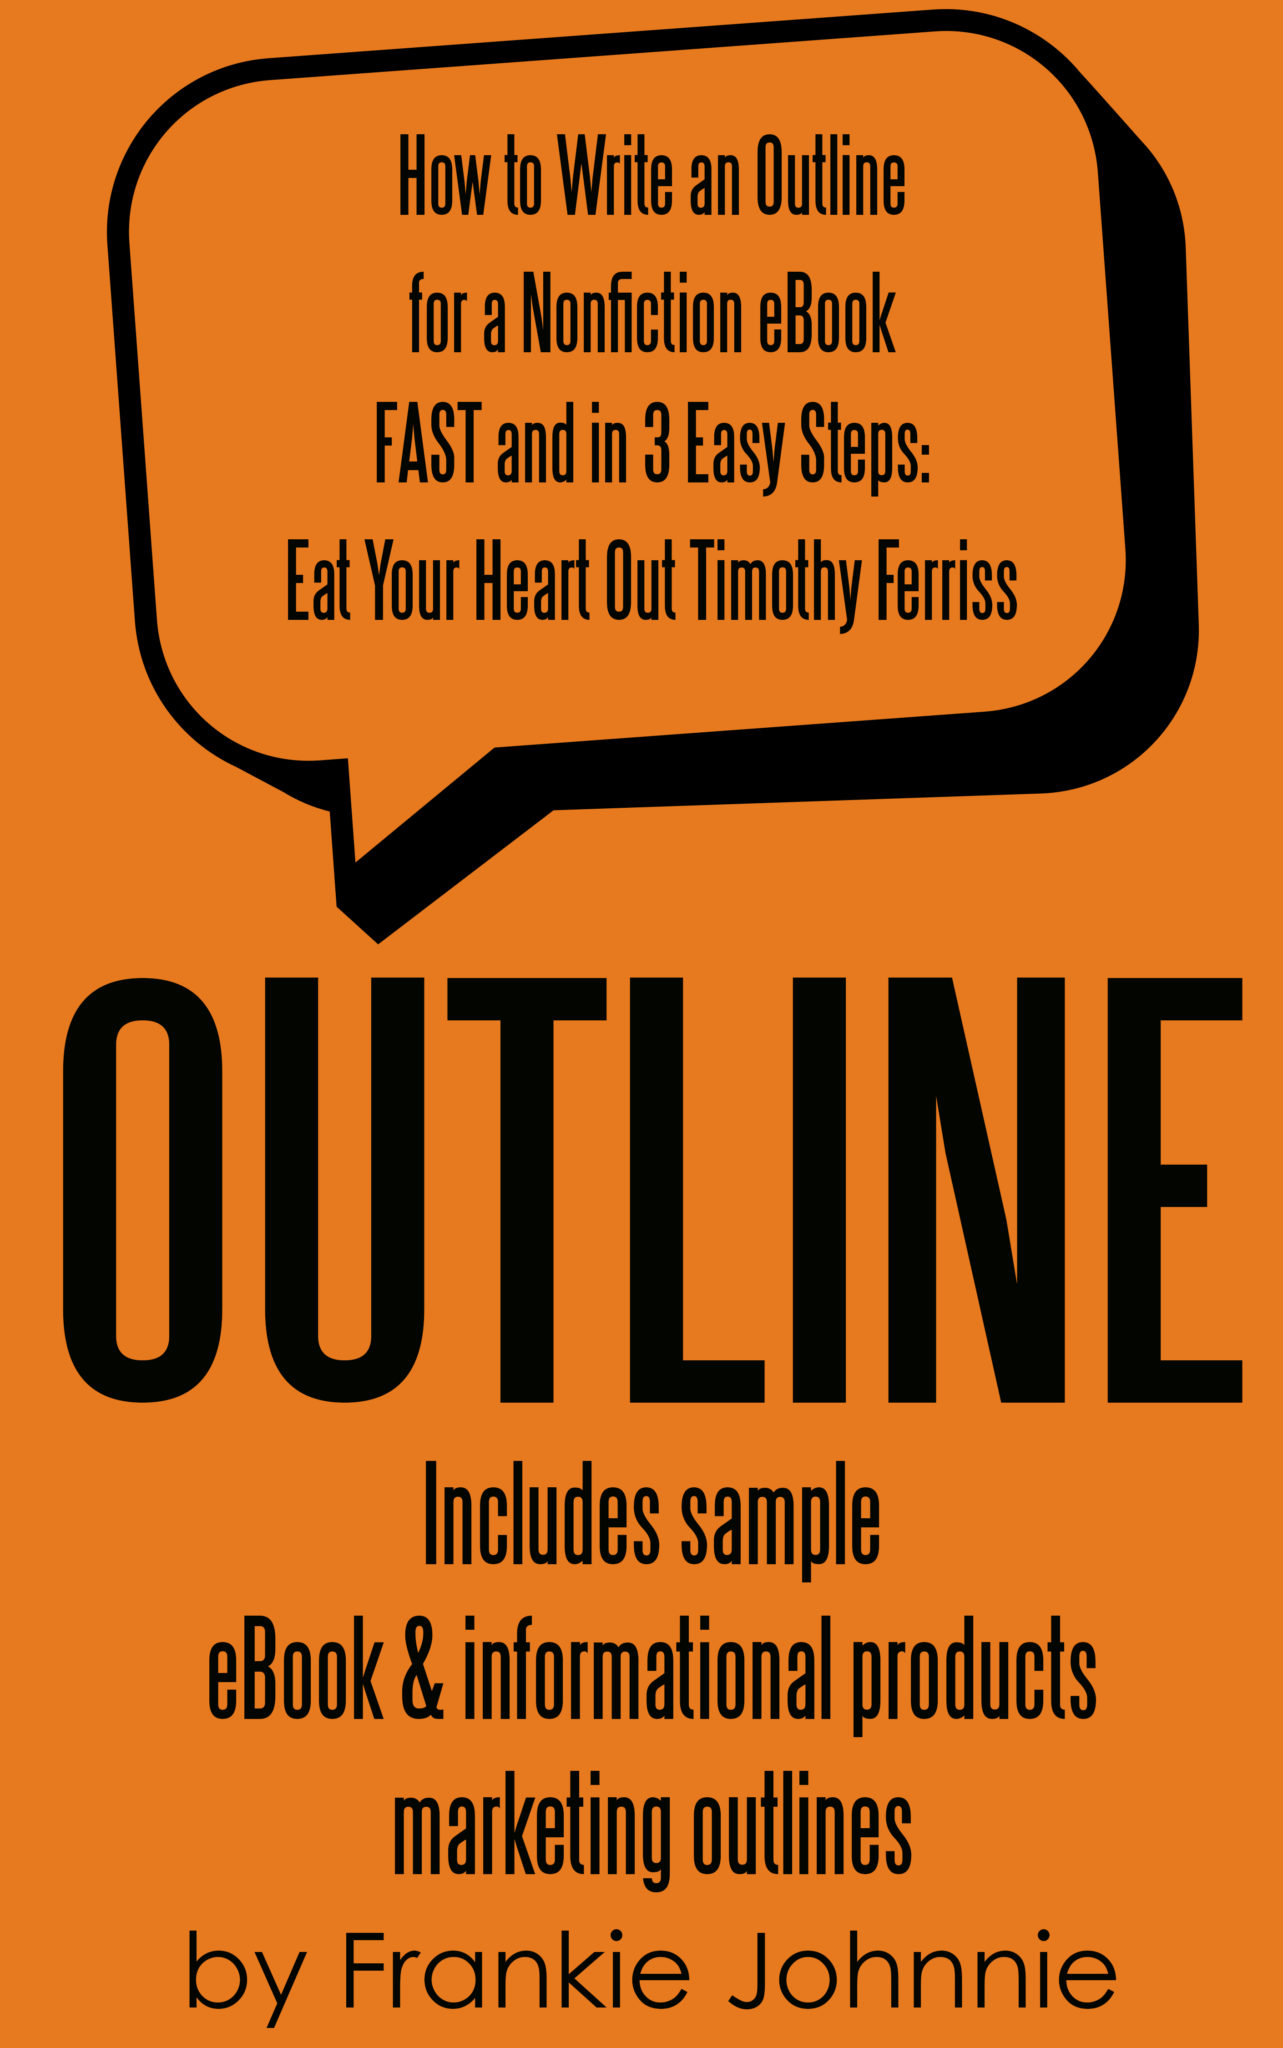 FREE: How to Write an Outline for a Nonfiction eBook FAST and in 3 Easy Steps by Frankie Johnnie